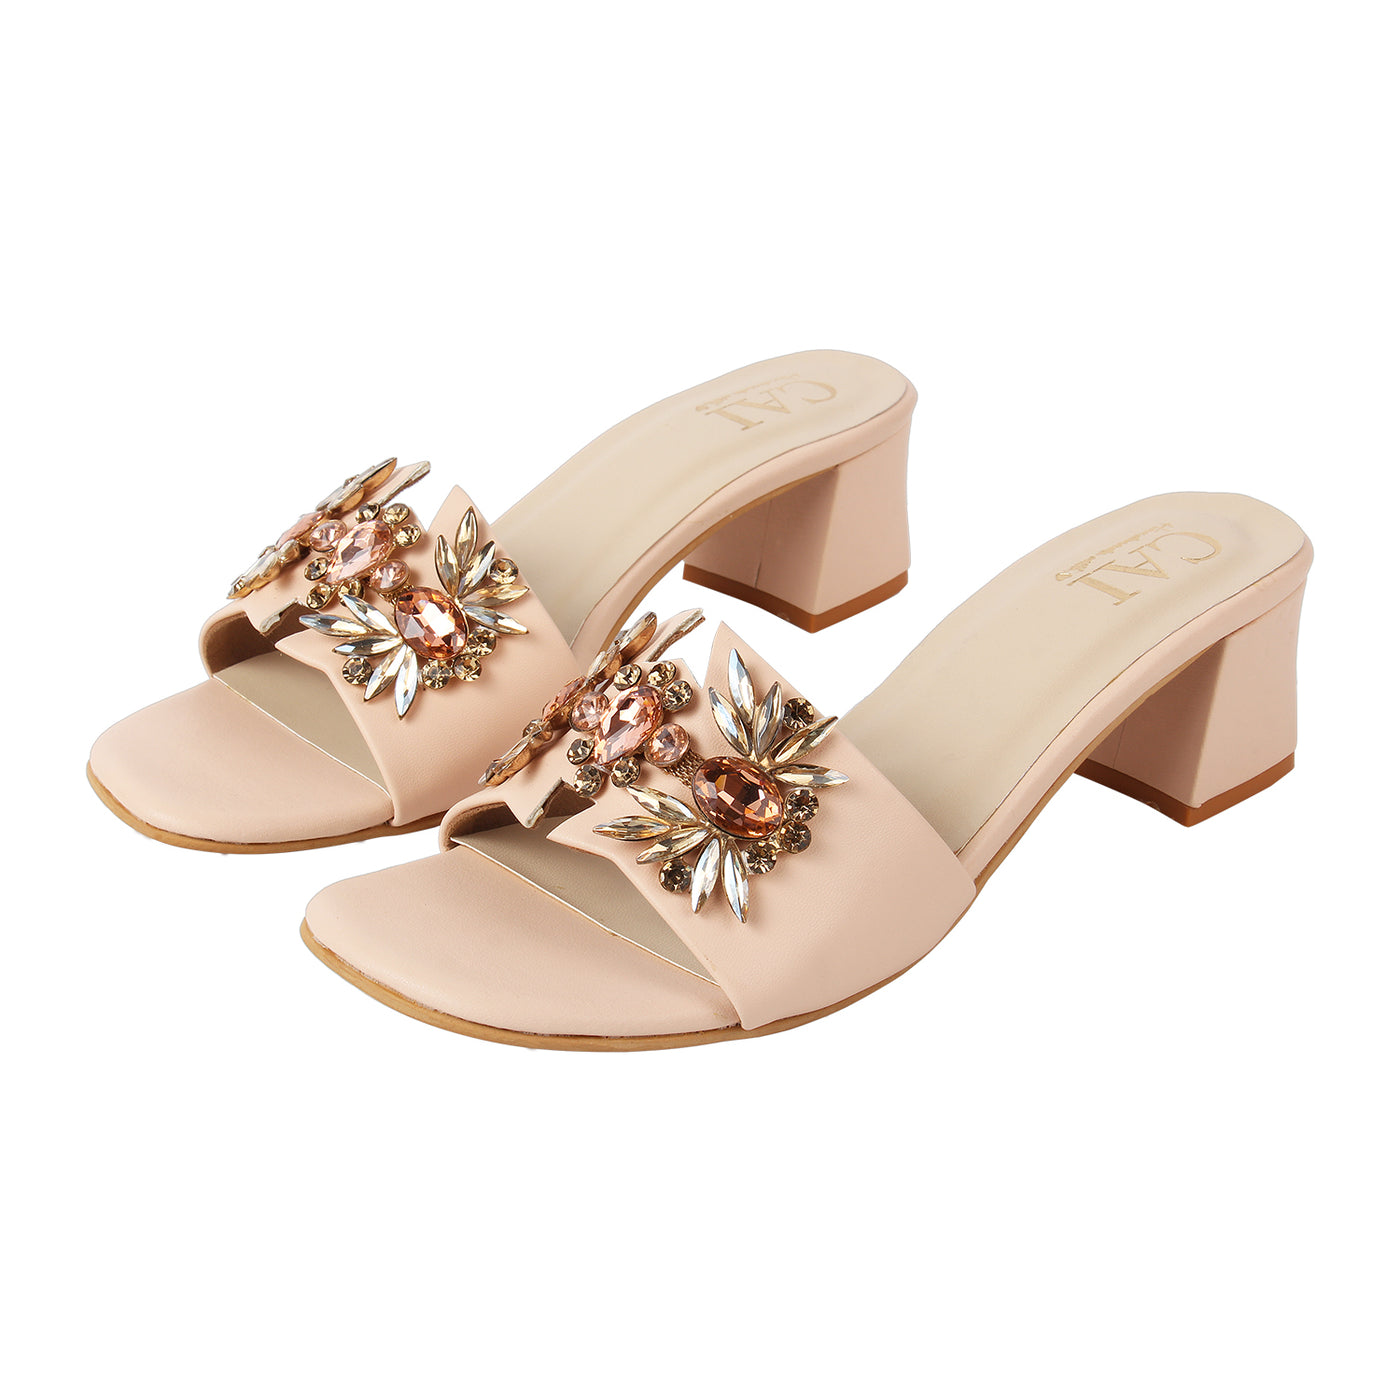 Peachy Embellished Heels at The Cai Store